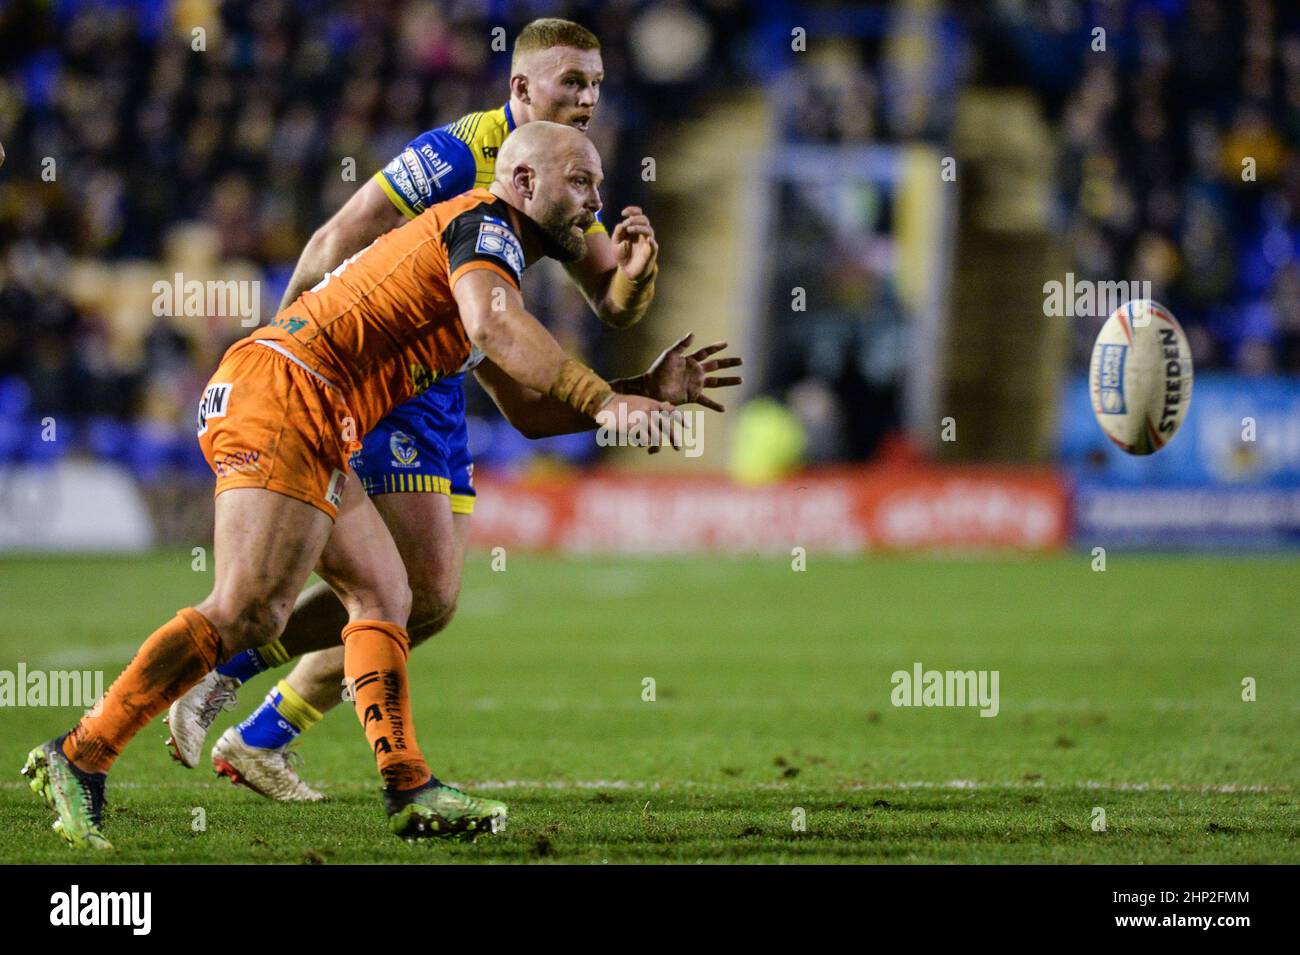 Warrington, England - 17 February 2022 - Paul McShane of Castleford Tigers in action during the Rugby League Betfred Super League Round 2 Warrington Wolves vs Castleford Tigers at Halliwell Jones Stadium, Warrington, UK  Dean Williams Stock Photo